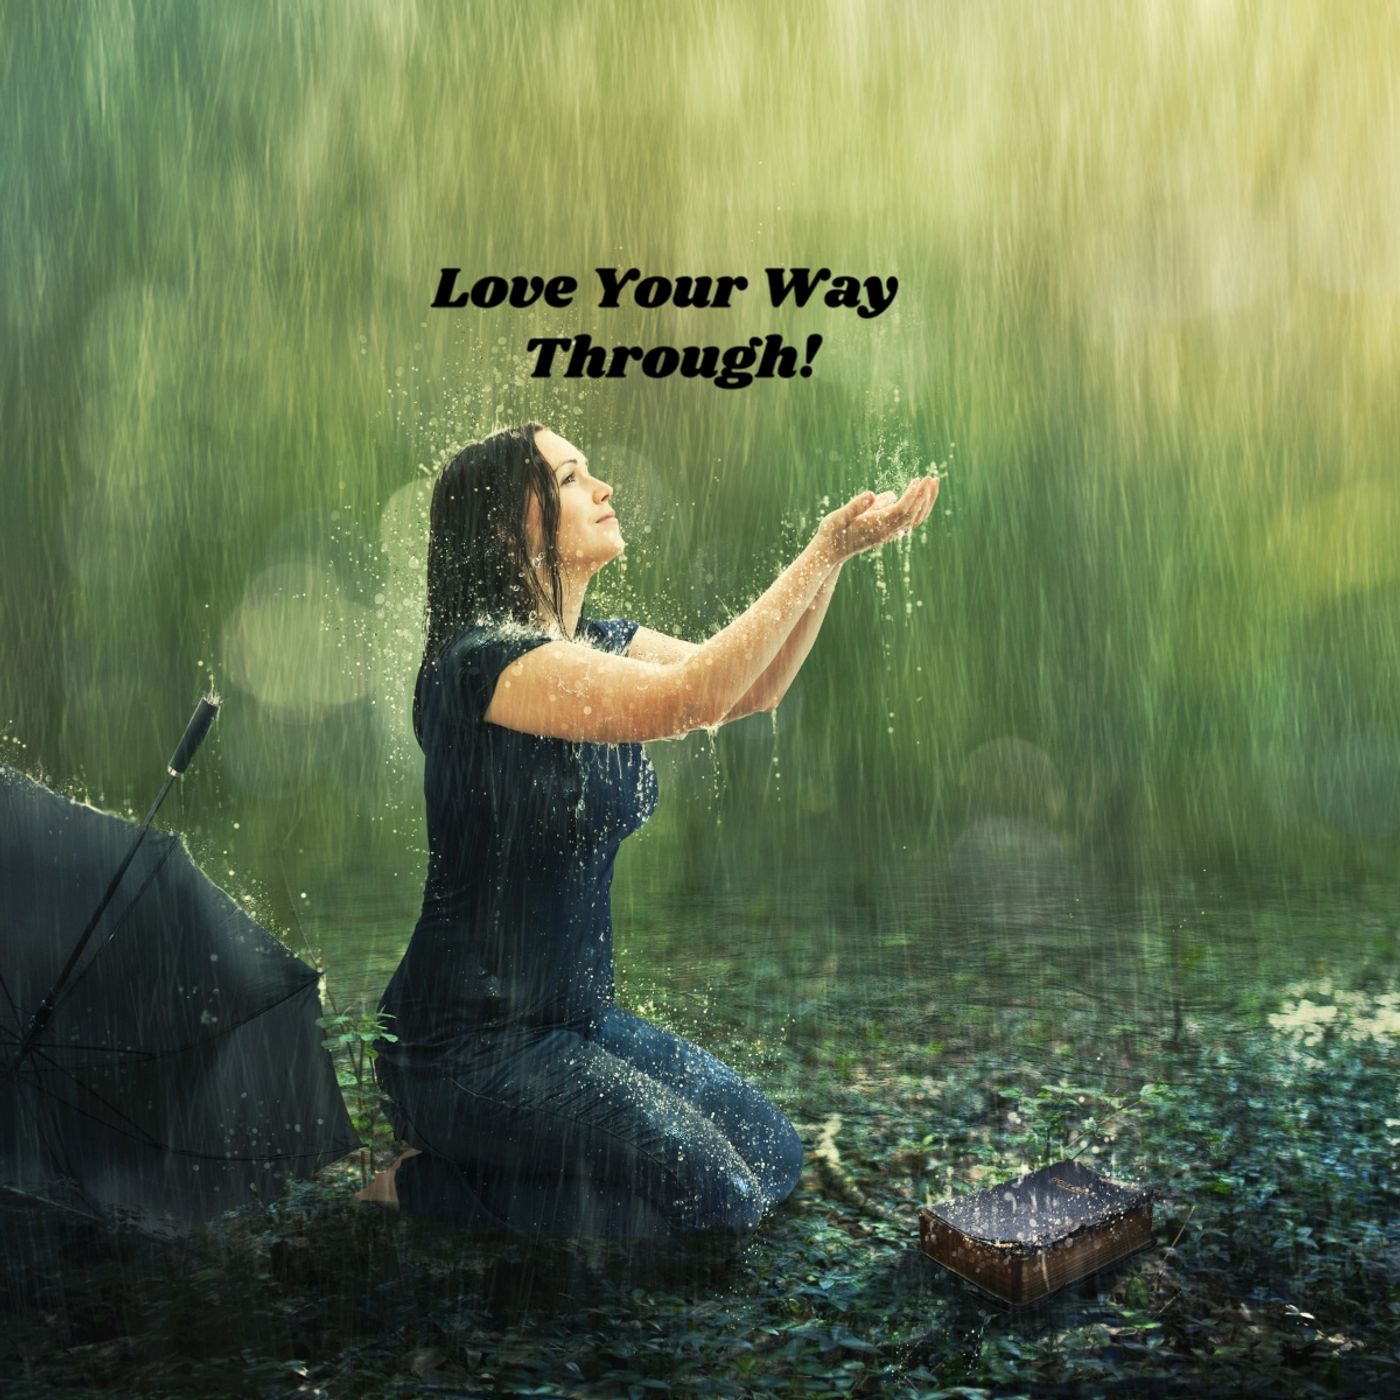 Love Your Way Through!